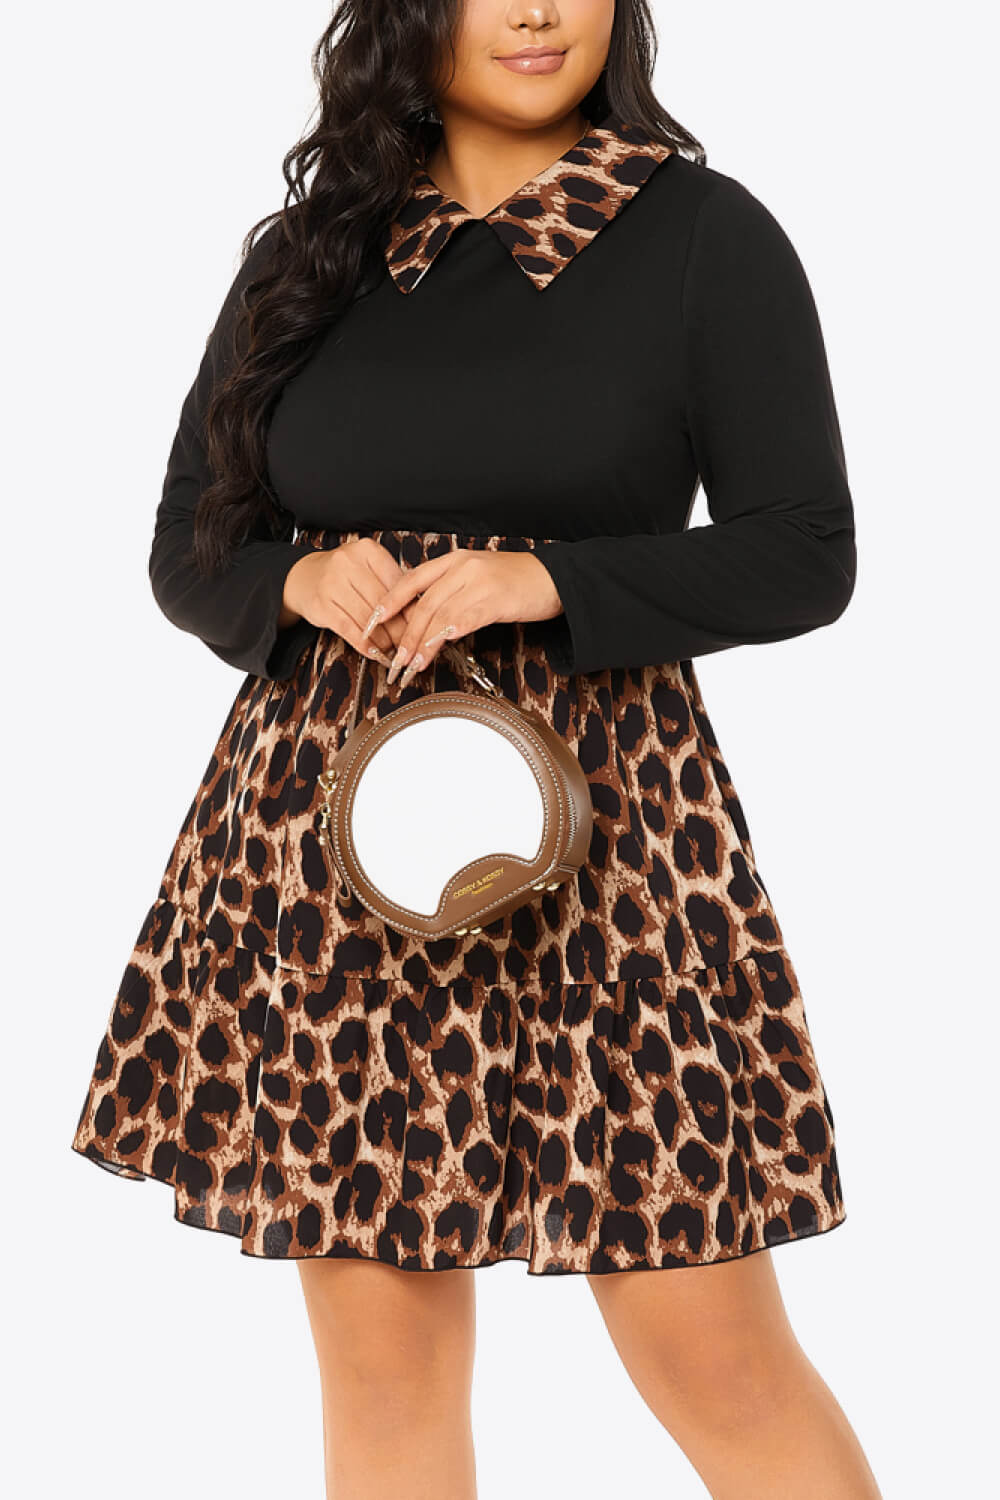 Plus Size Leopard Color Bock Collared Long Sleeve Dress